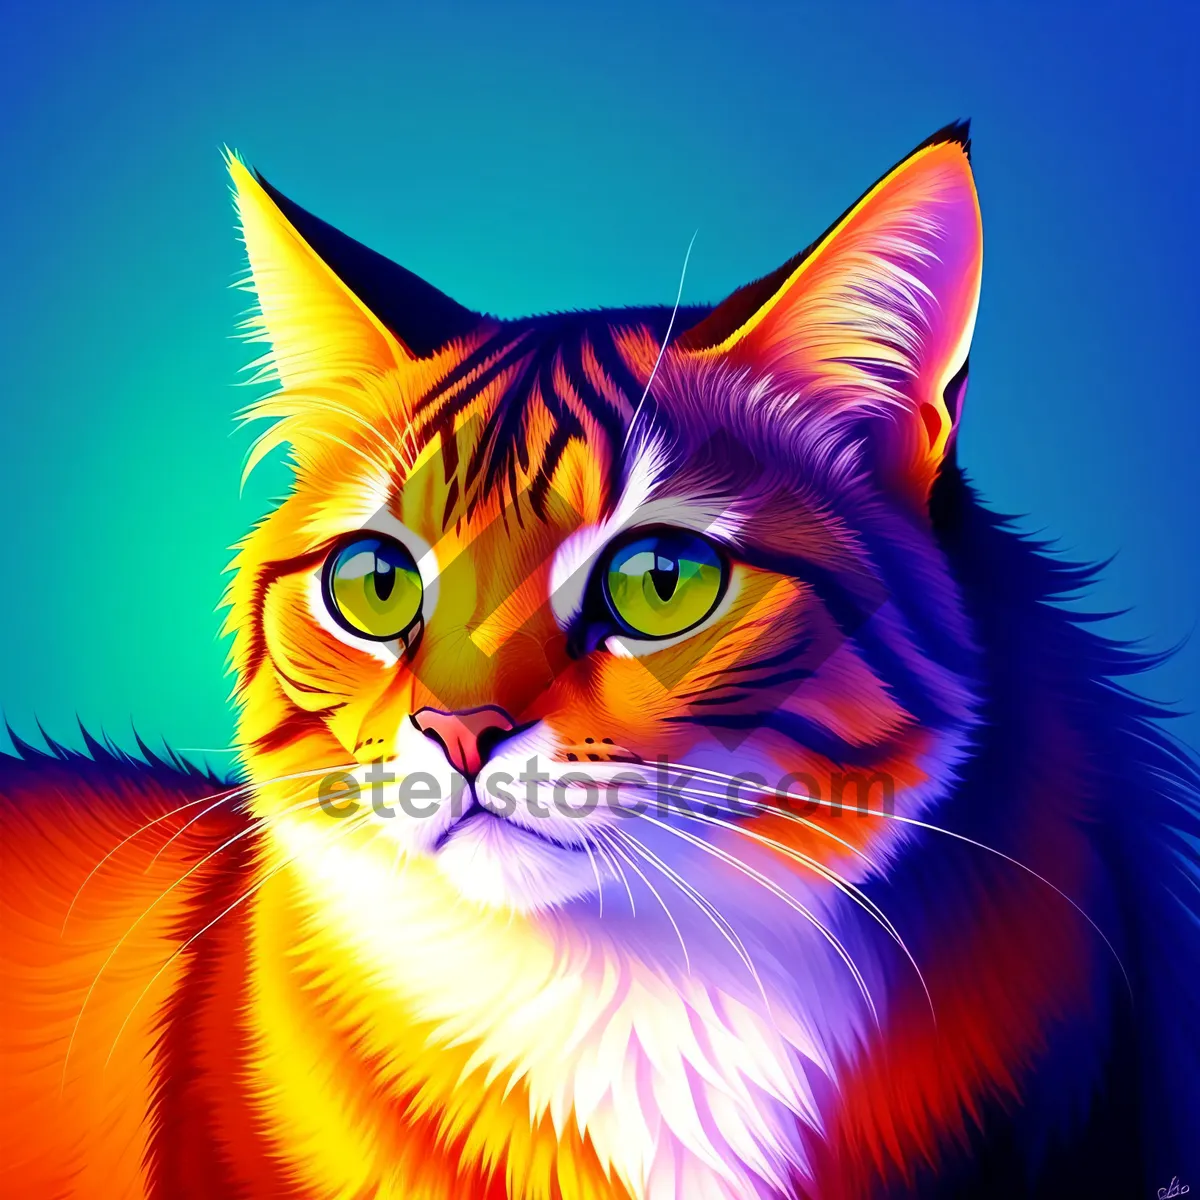 Picture of Colorful Cat Artwork with Graphic Design and Bass Inspiration